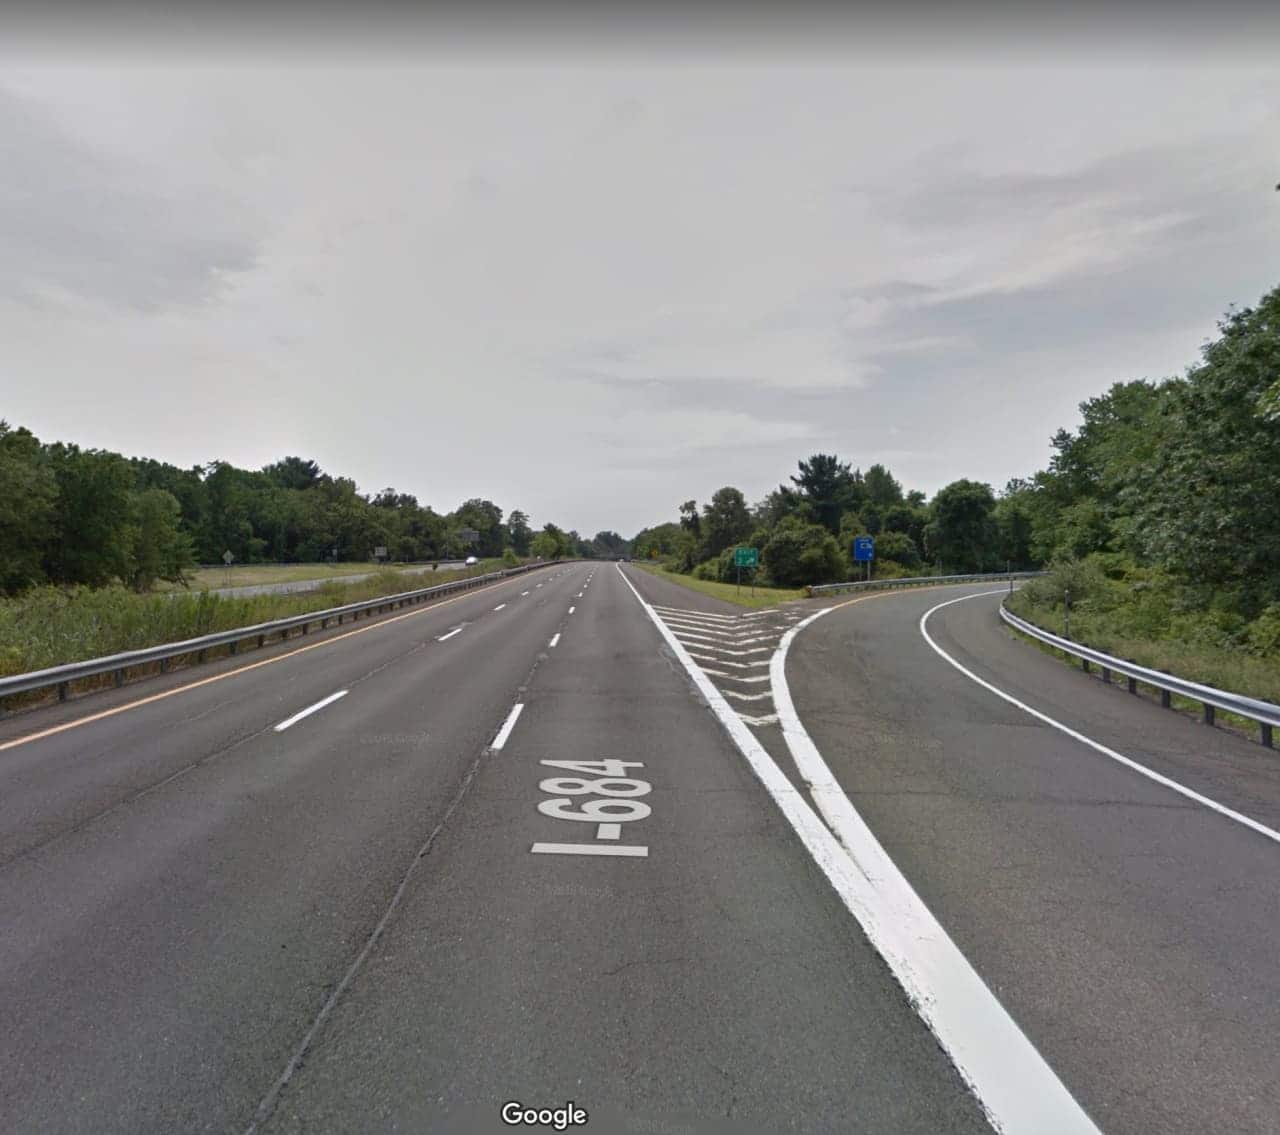 There will be lane closures on I-684 beginning at Exit 3.